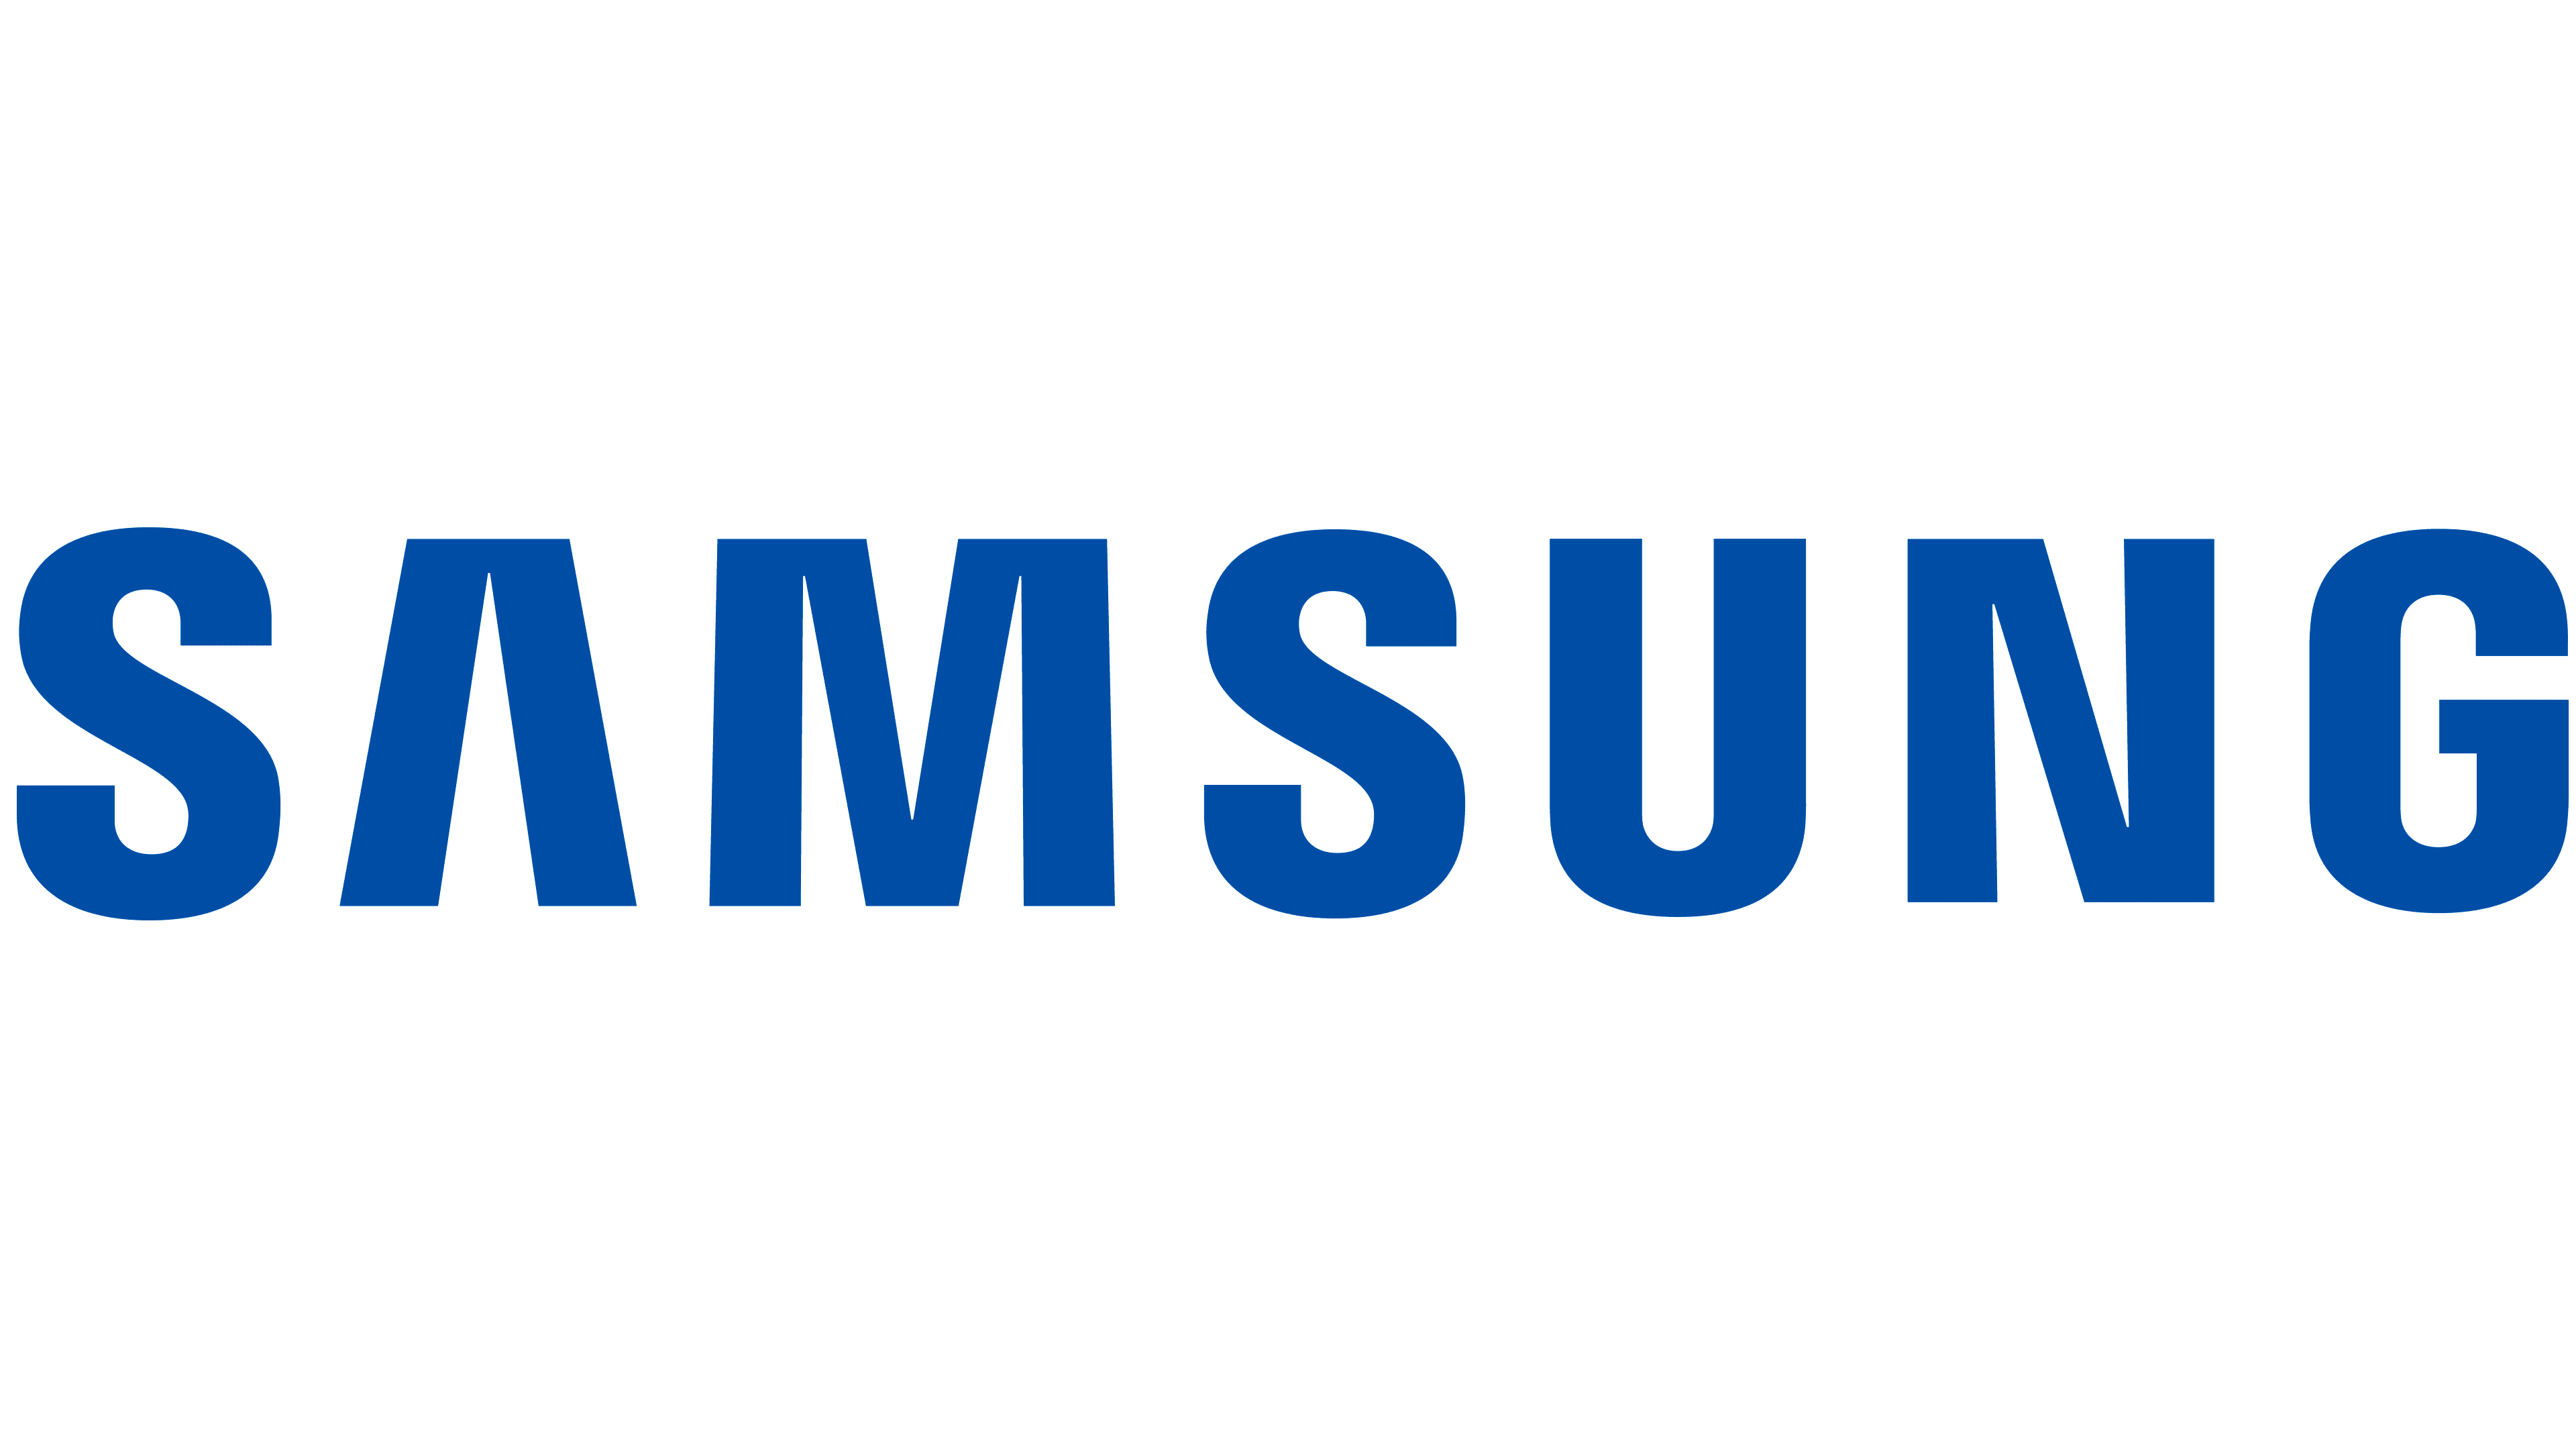 Samsung Logo, history, meaning, symbol, PNG